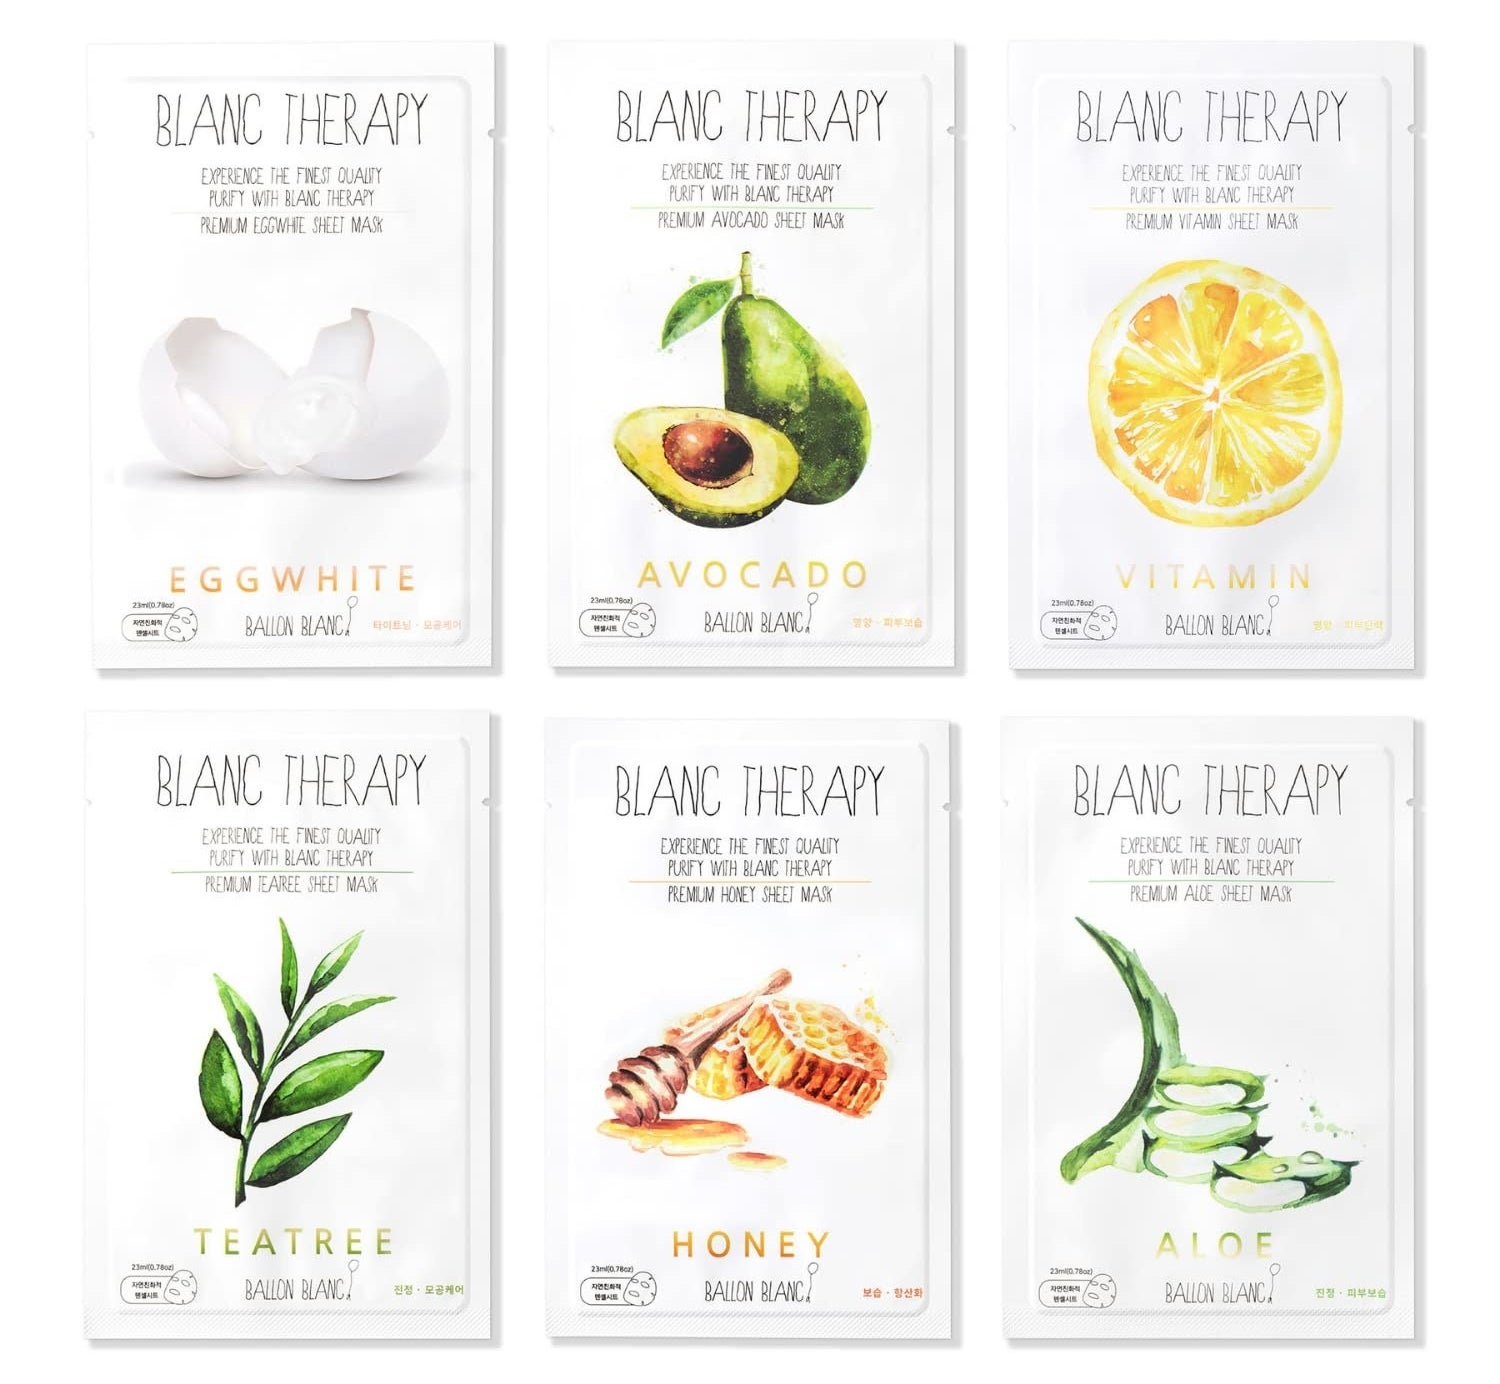 the packets of face masks in various styles